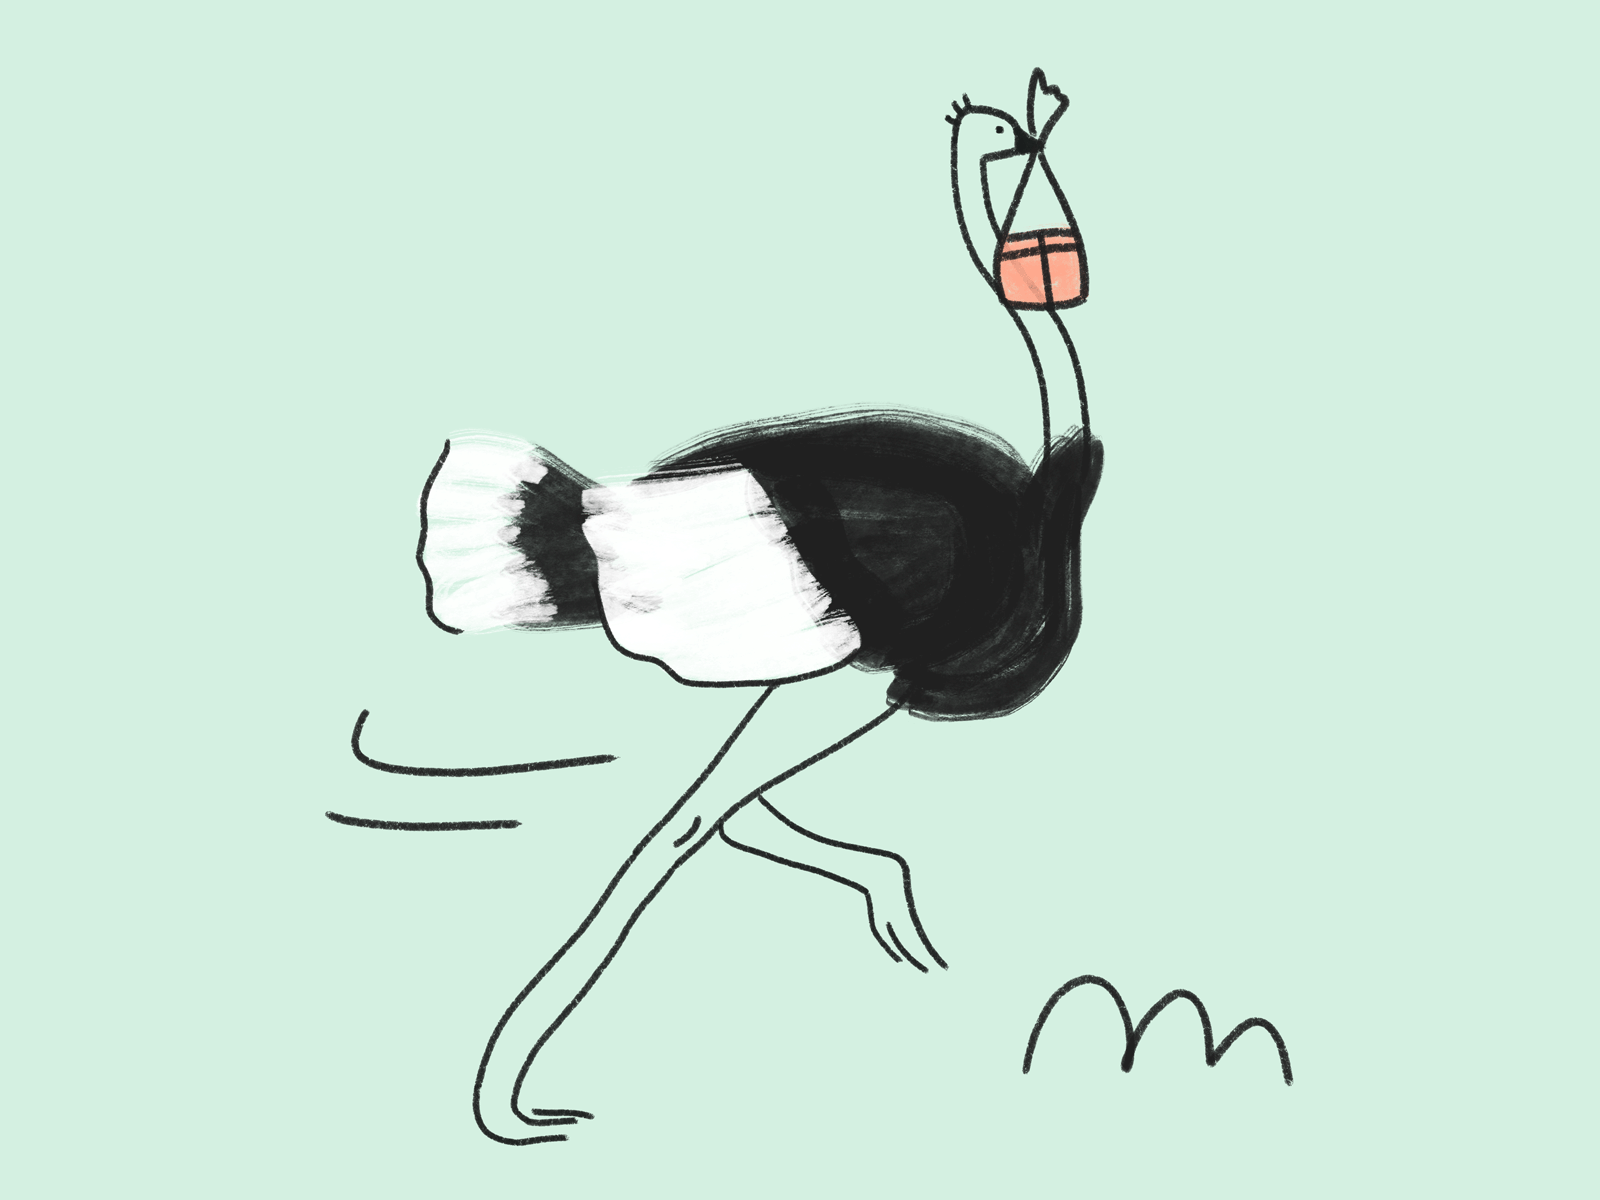 Your card is on its way! app illustration banking app banking illustration handdrawn illustration style illustrator interaction ostrich product illustration running